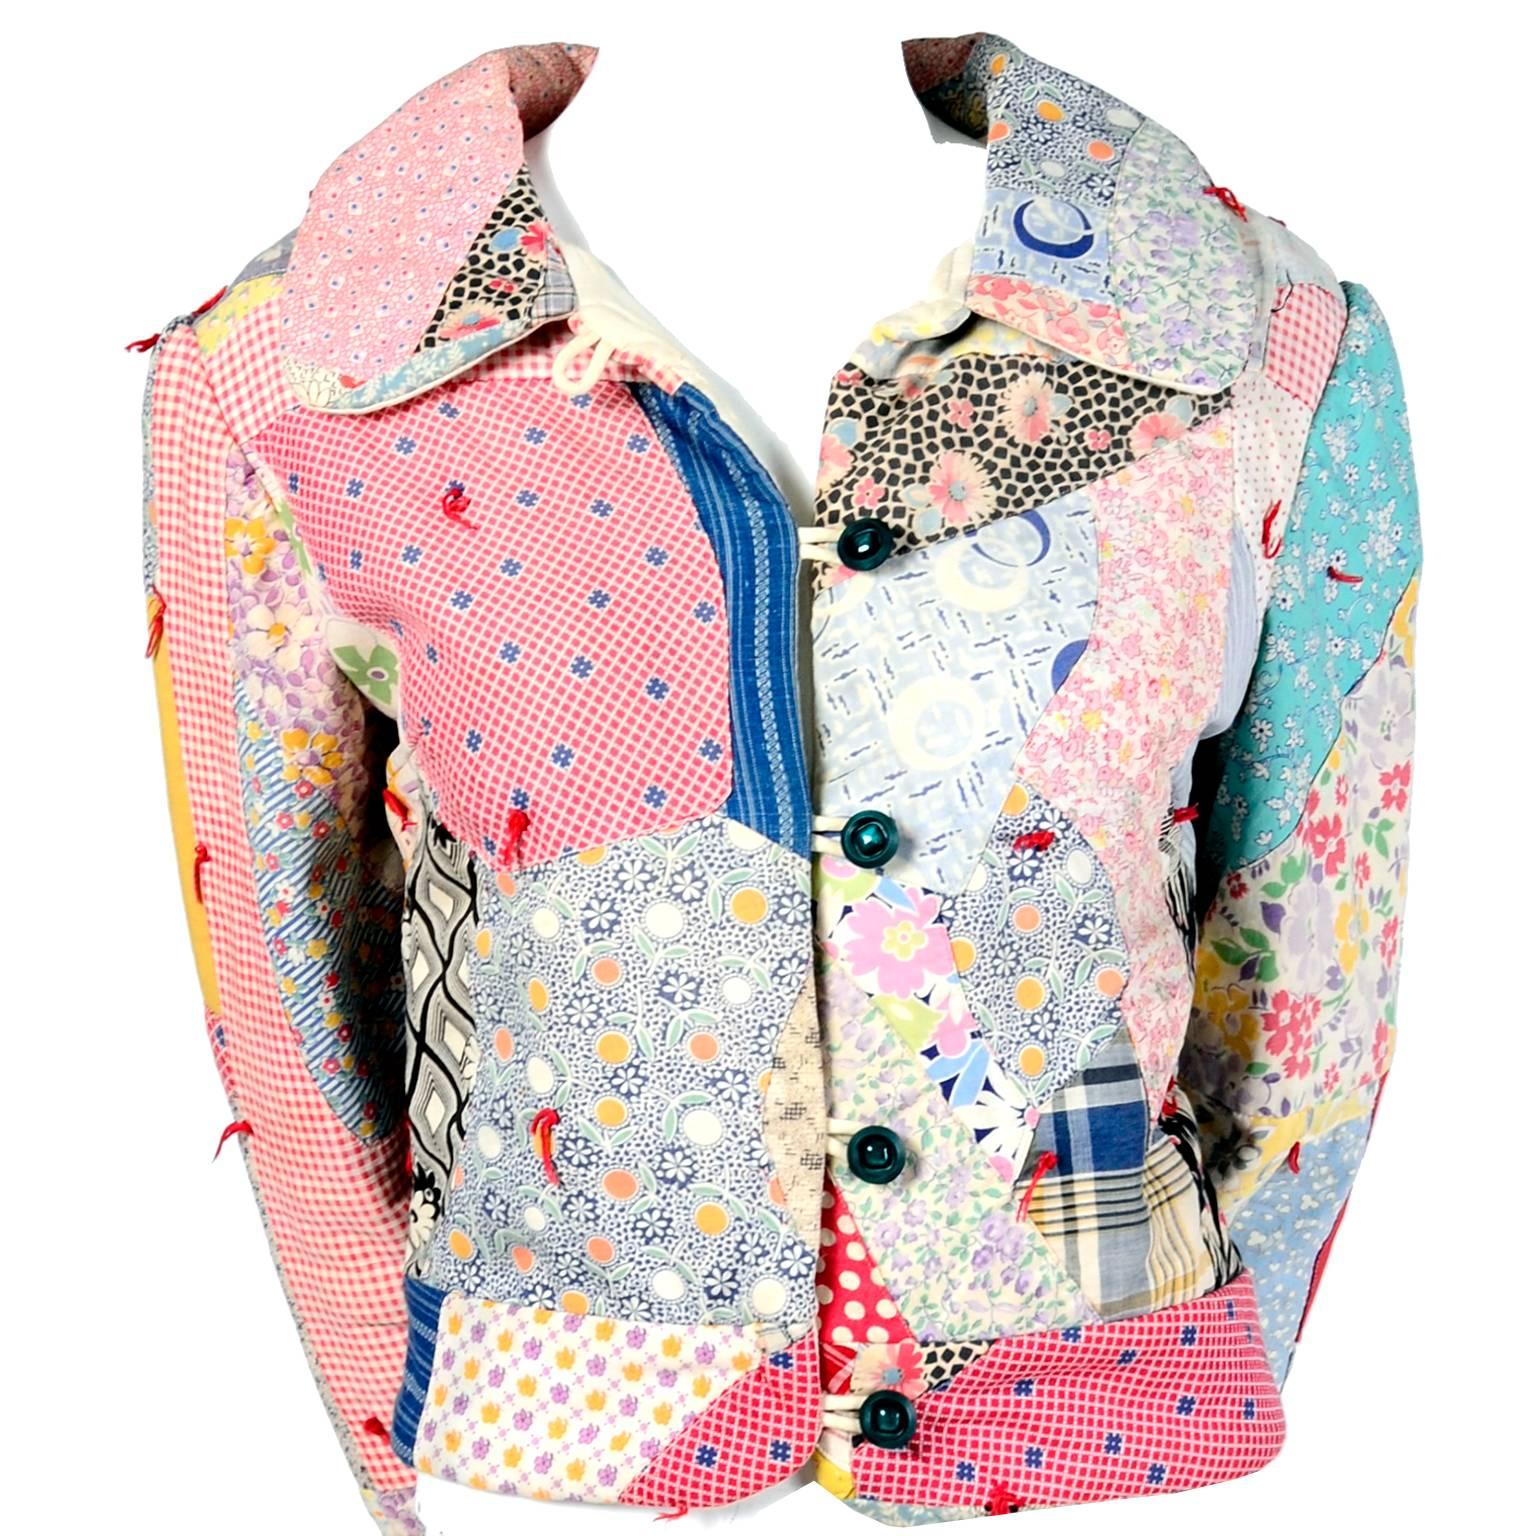 This one of a kind vintage jacket was created in the late 1980's by Jane Beckwith and sold under her label Bearware.  The jacket is quilted with vintage fabrics and closes in the front with 3 vintage buttons.  This fun jacket has amazing quilted